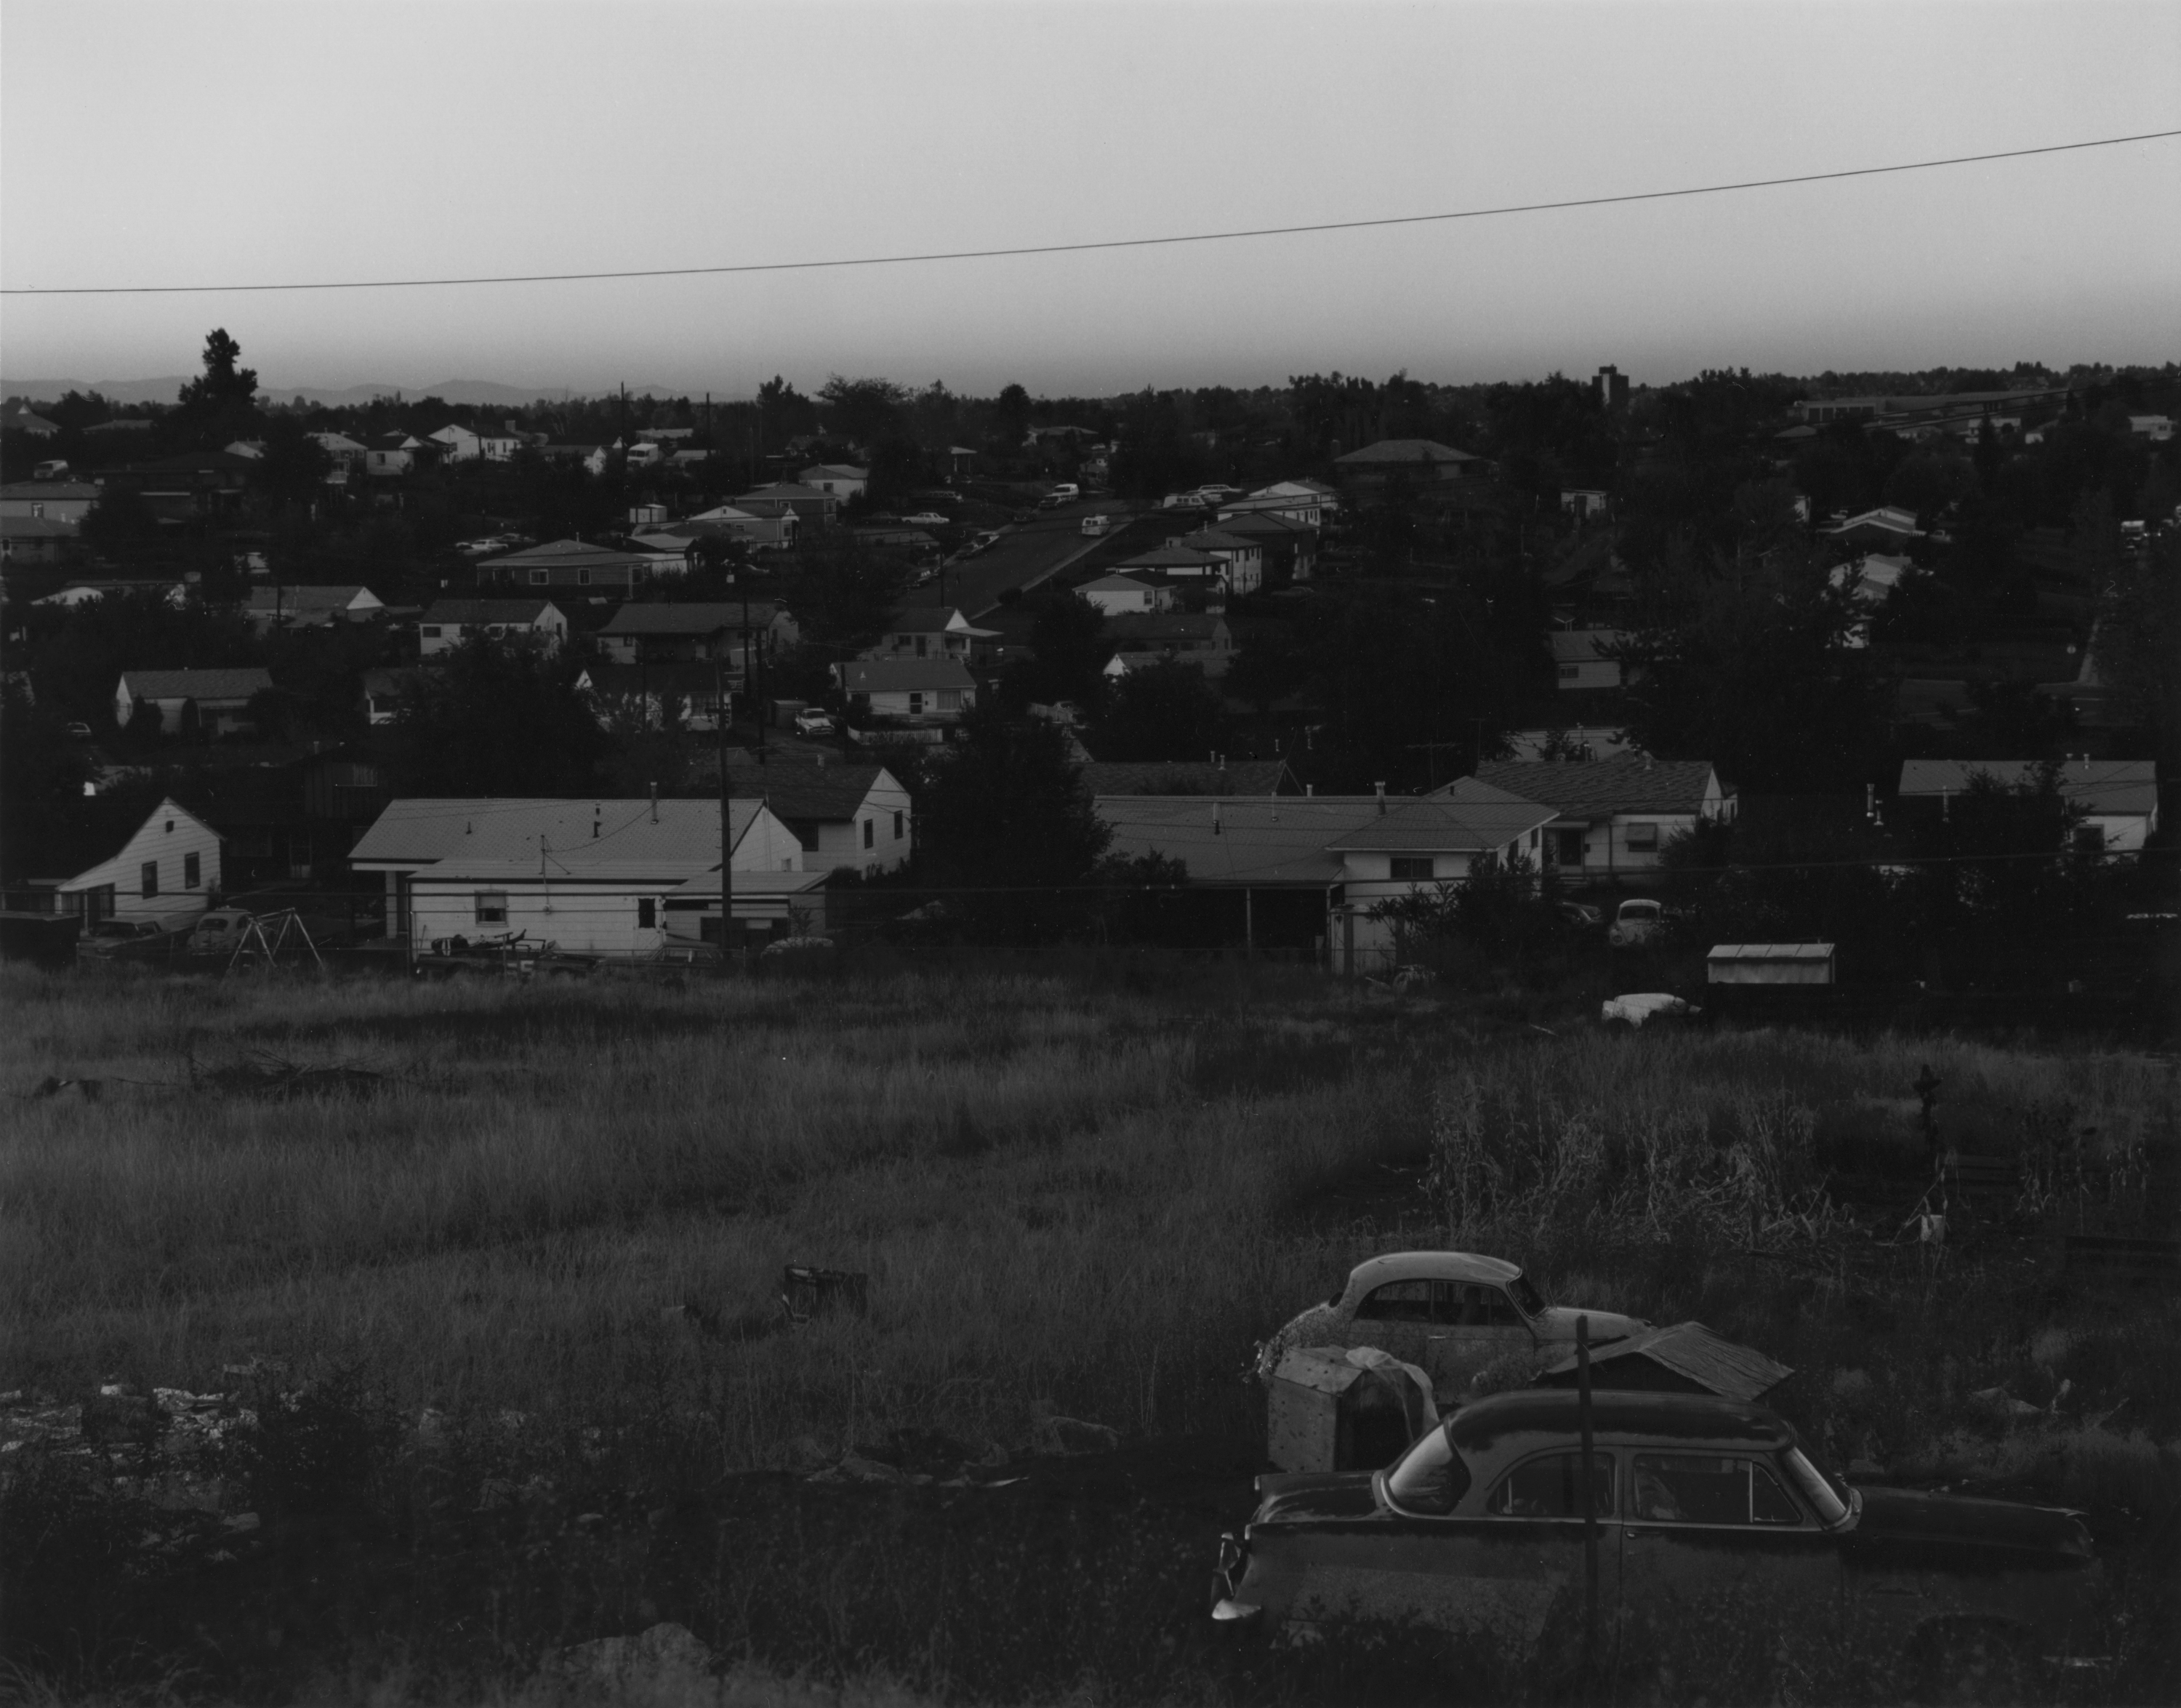 Black and white photograph of empty field and residential neighborhood